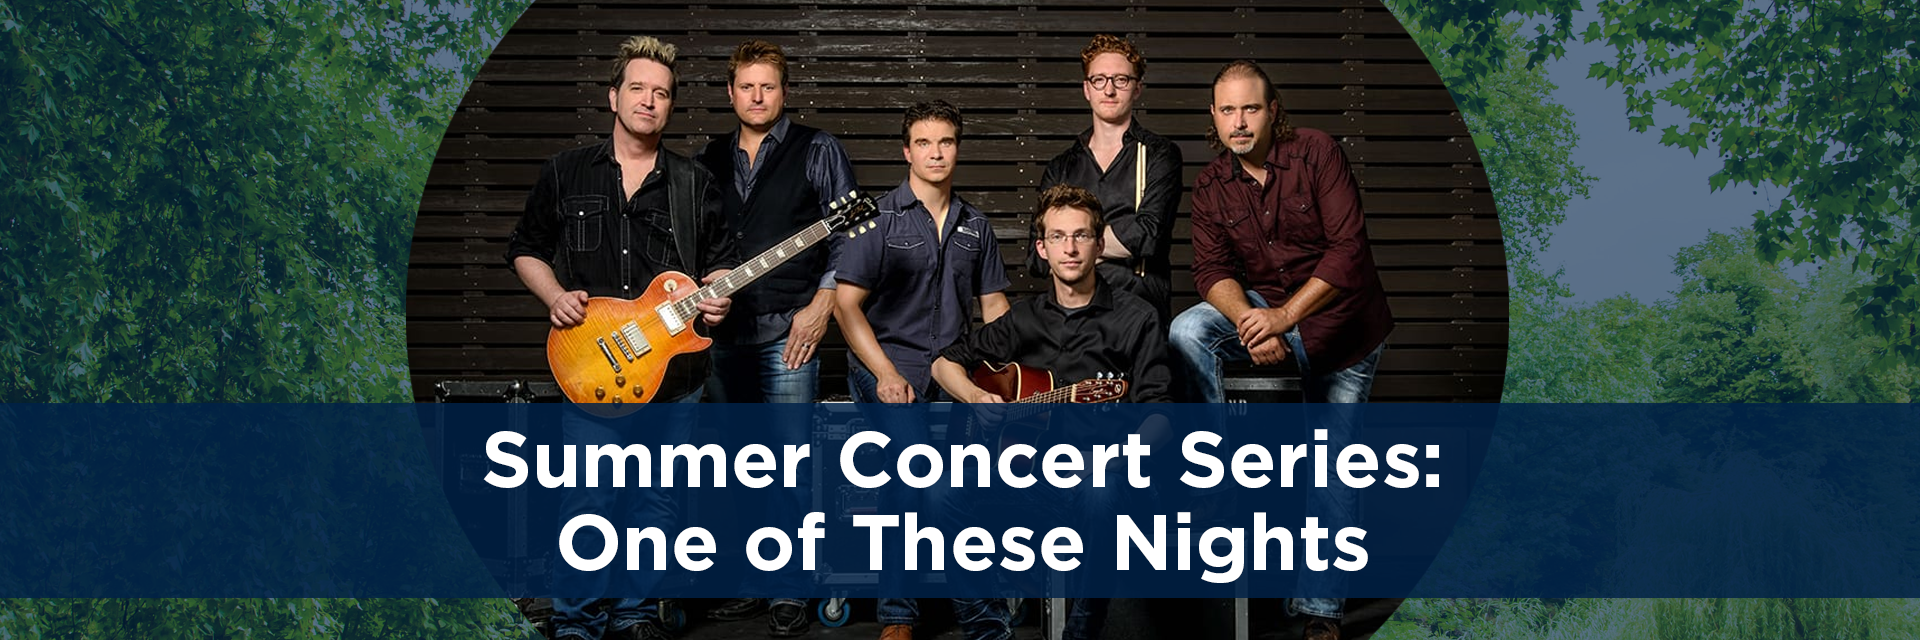 Events-Cantigny Summer Concert-One of These Nights--Eagles Tribute